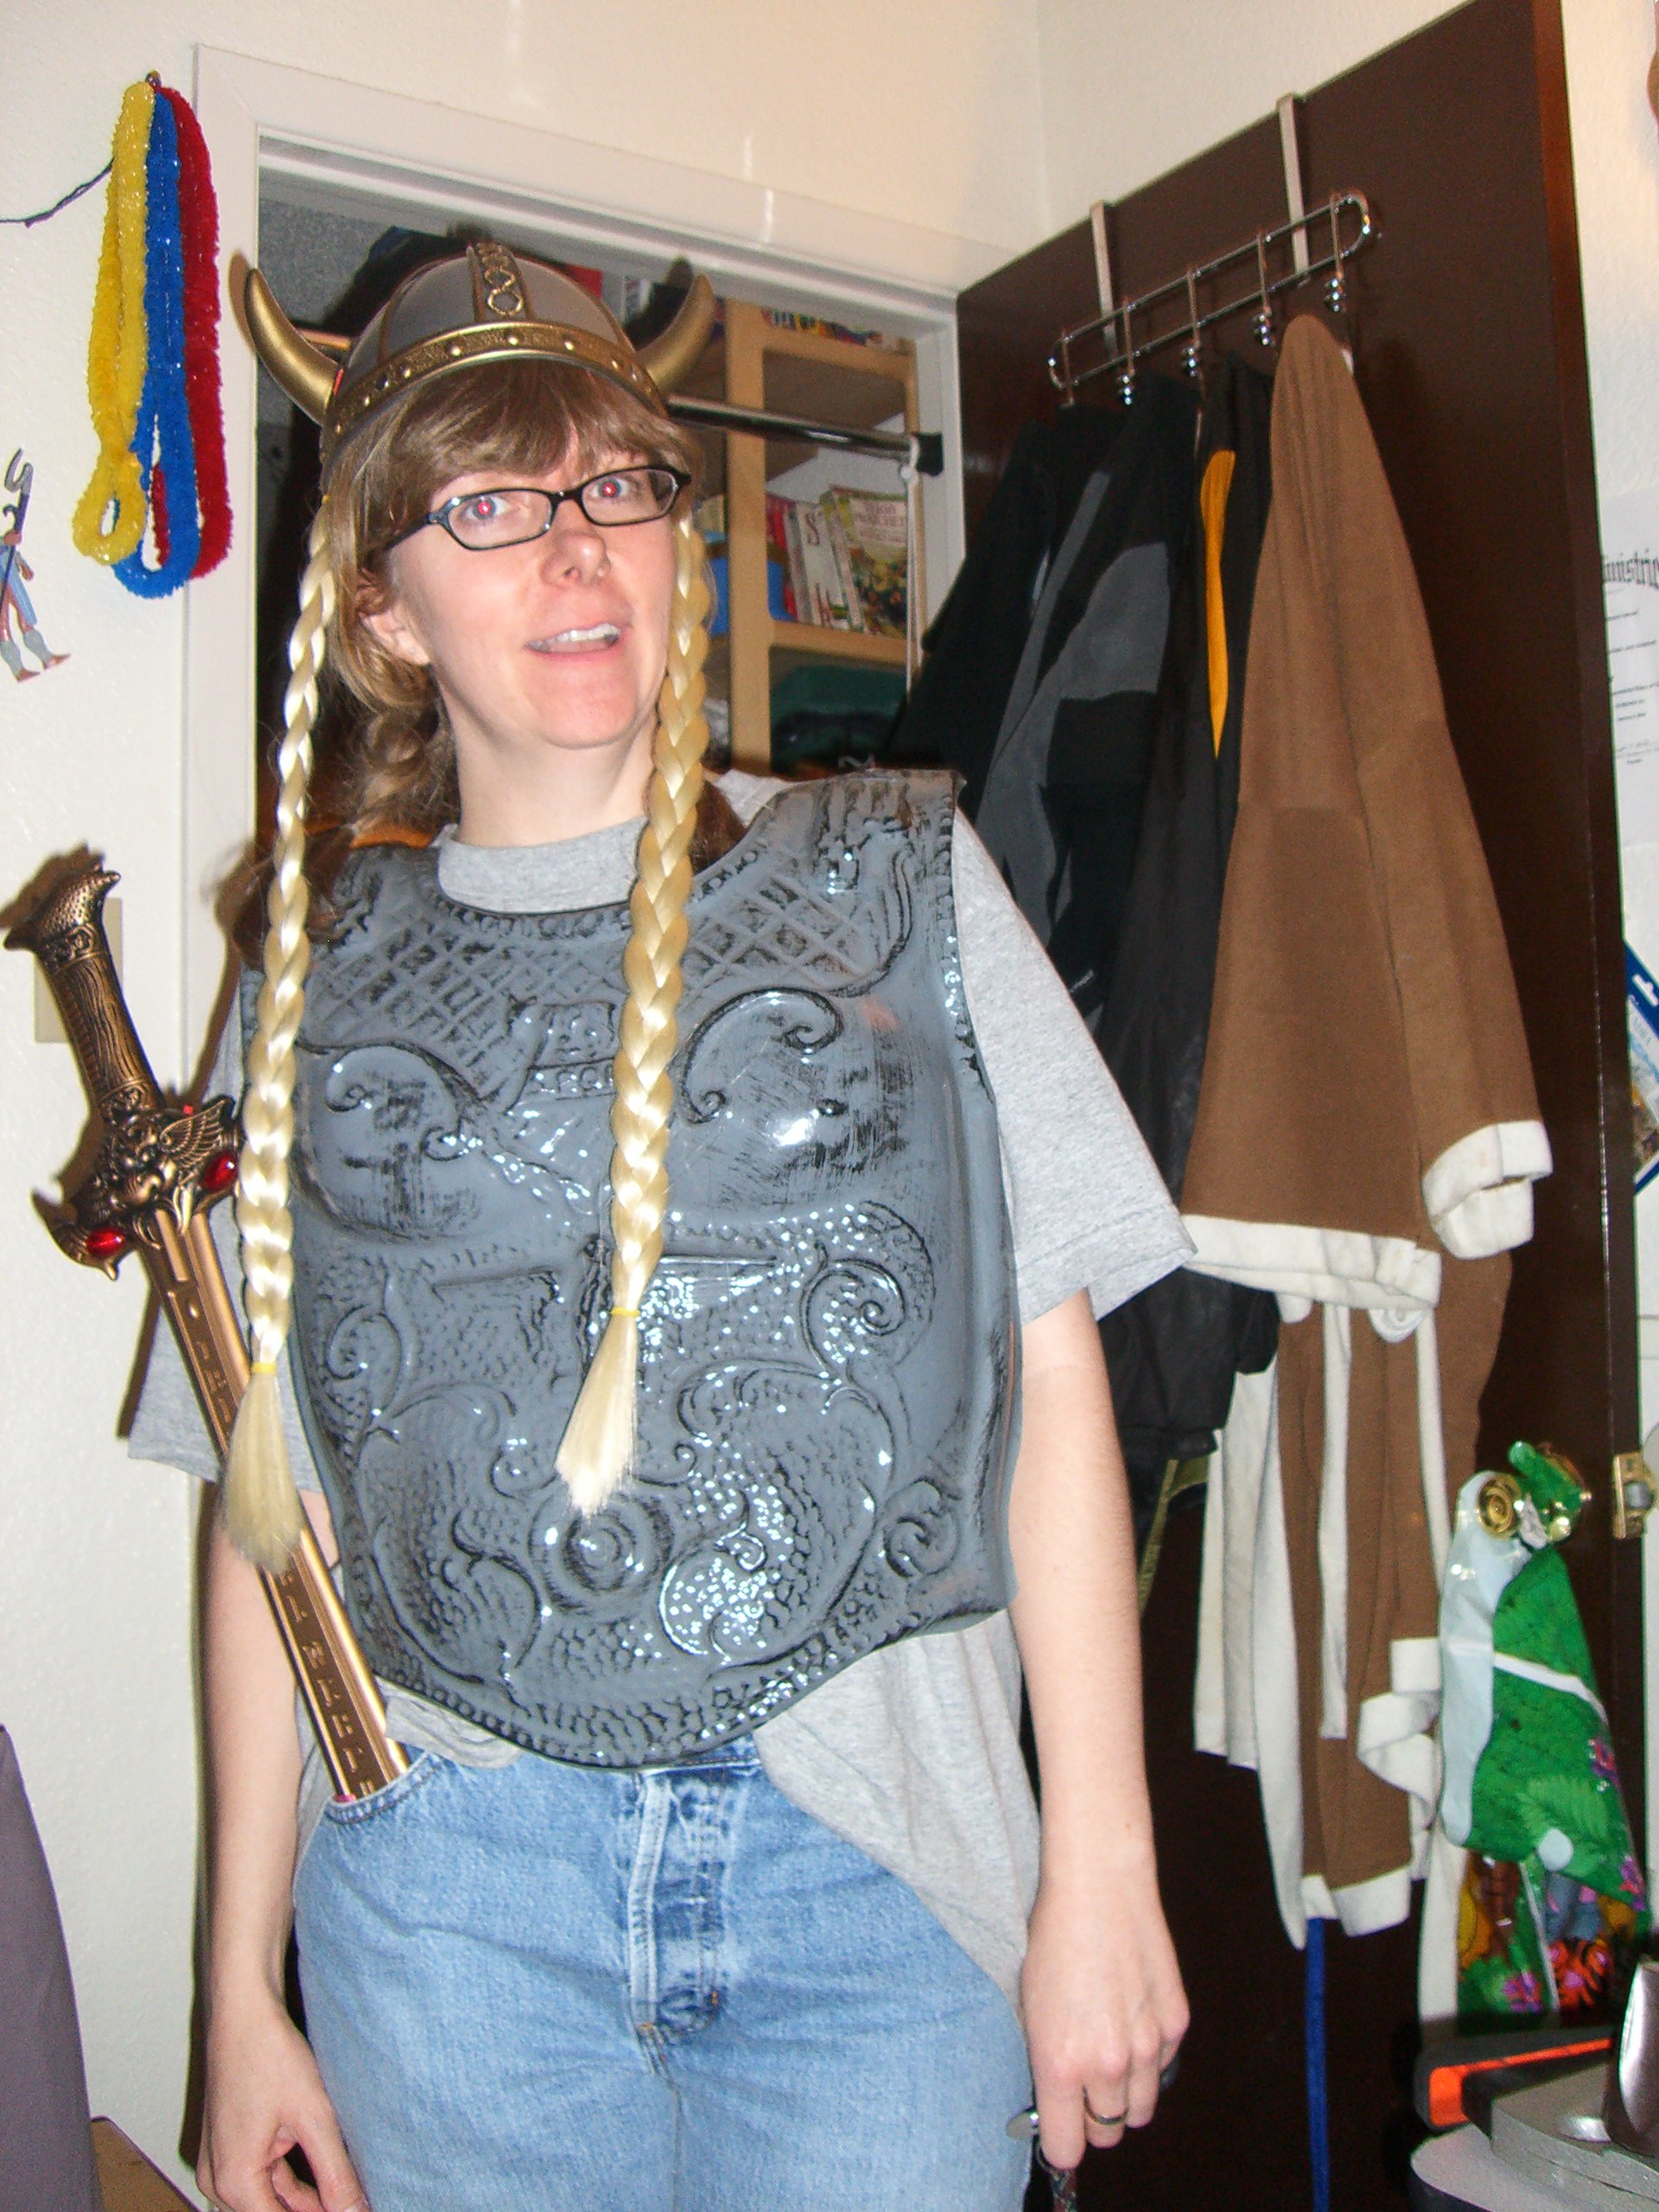 A in a viking helmet with braids